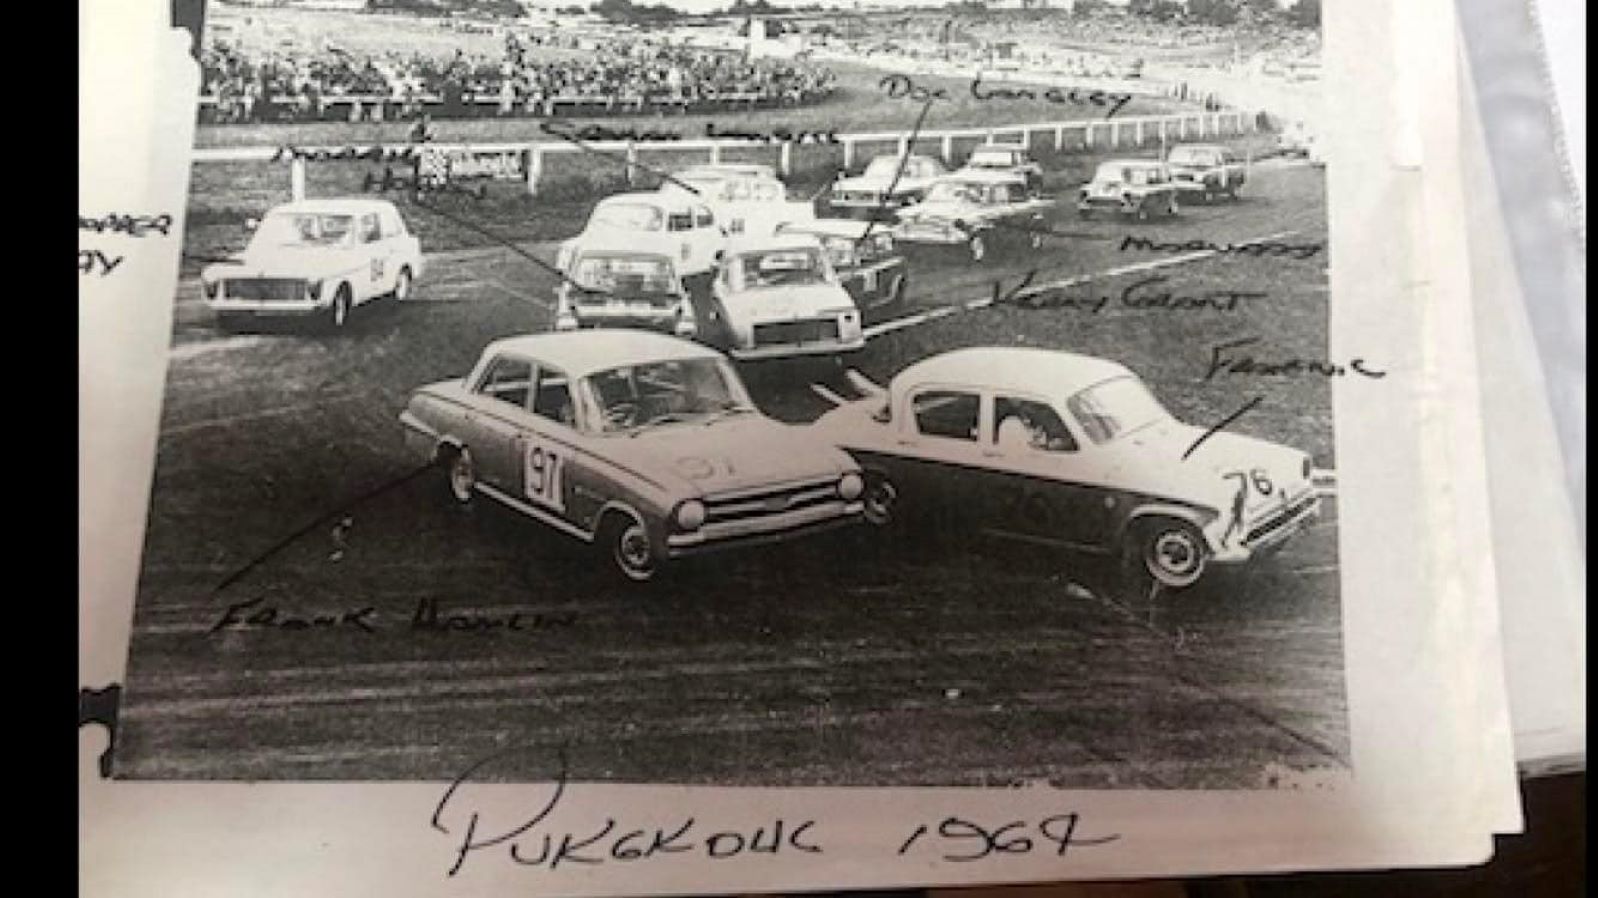 Name:  Pukekohe 1964 #022 1964 Saloon Car field at the Elbow - GP meeting Q 172 kb arch HVRA Bruce Dyer.jpg
Views: 358
Size:  172.4 KB